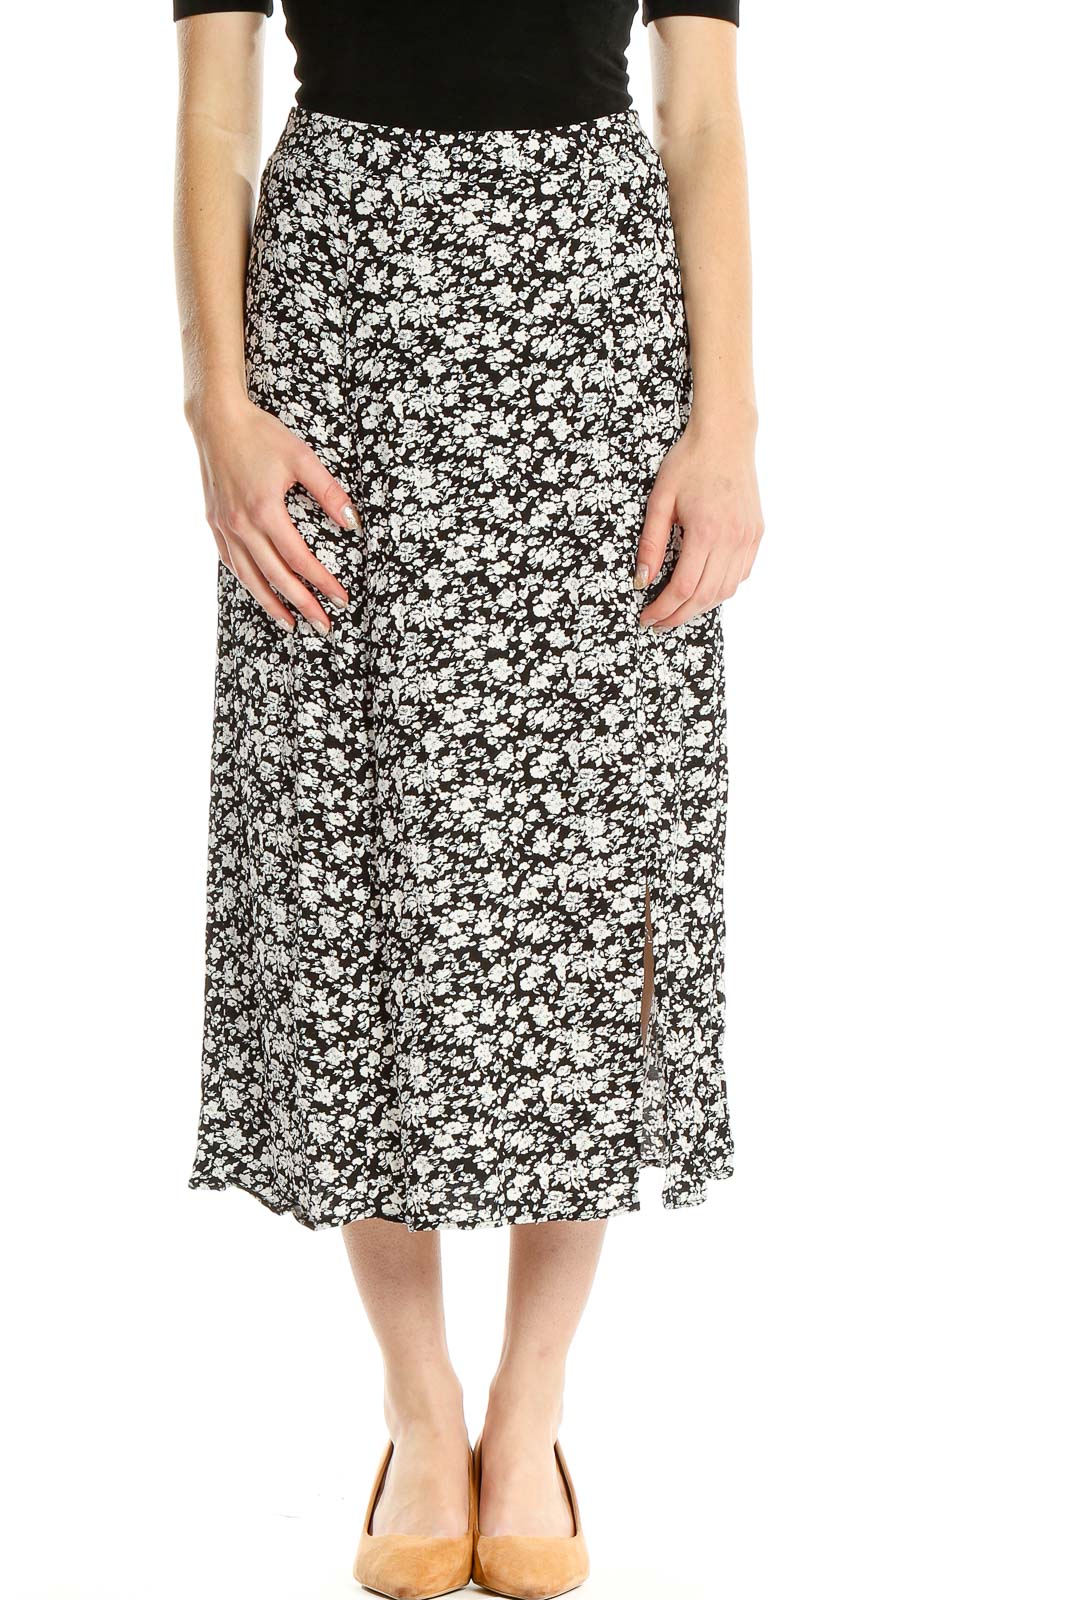 White Floral Print Casual Straight Skirt Front